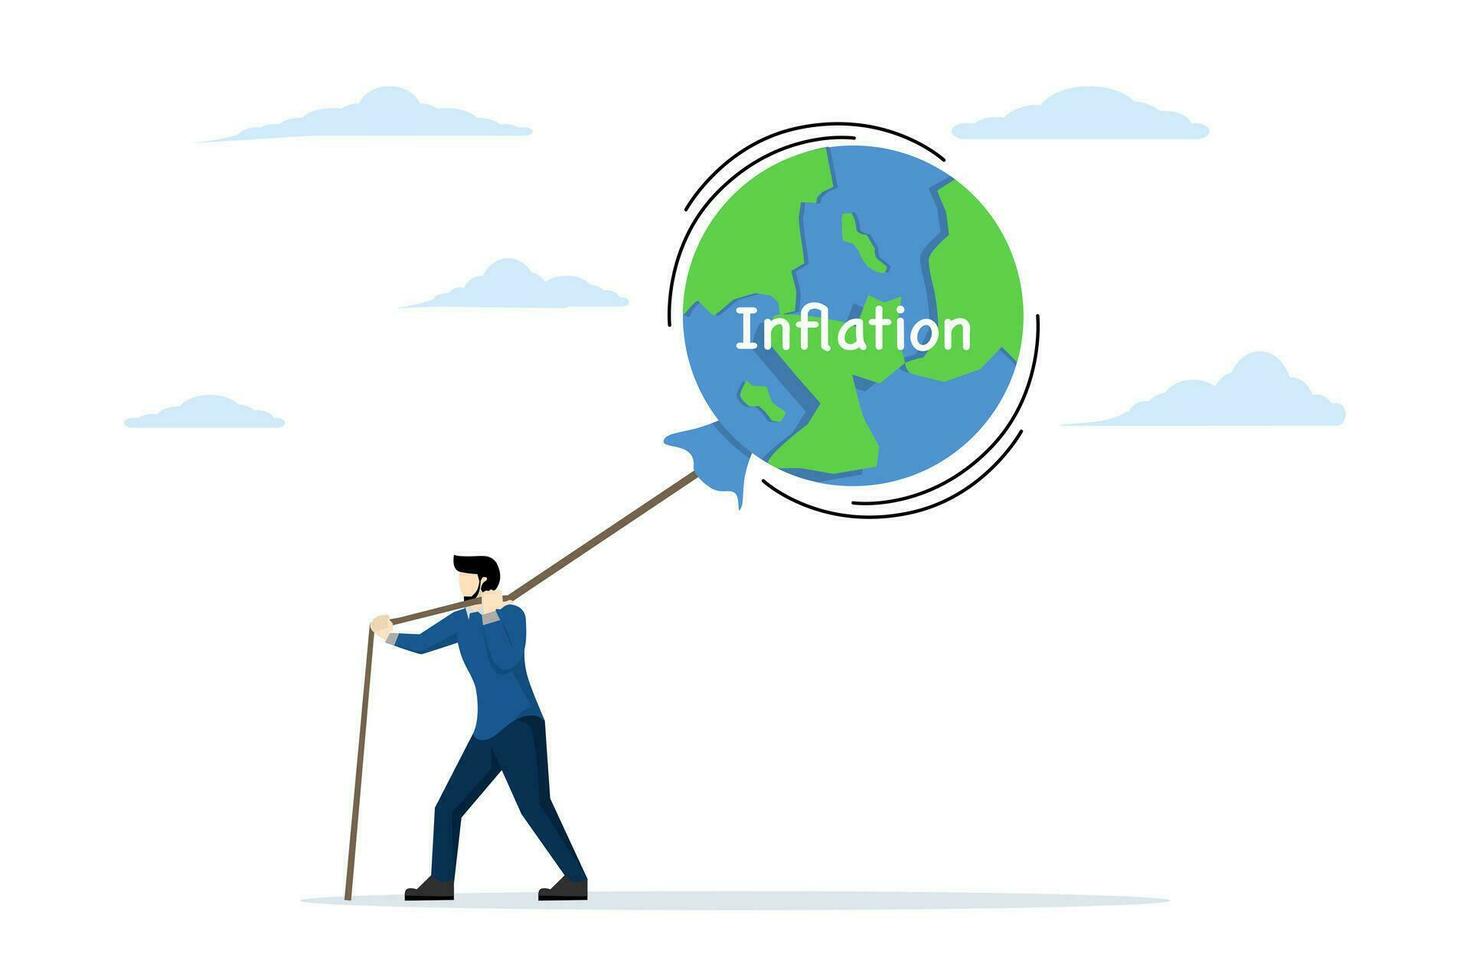 Increase in central bank interest rates. Global economic risks. World inflation bubble. Supply and demand are balanced. Entrepreneurs try to keep the inflationary balloon from rising. vector